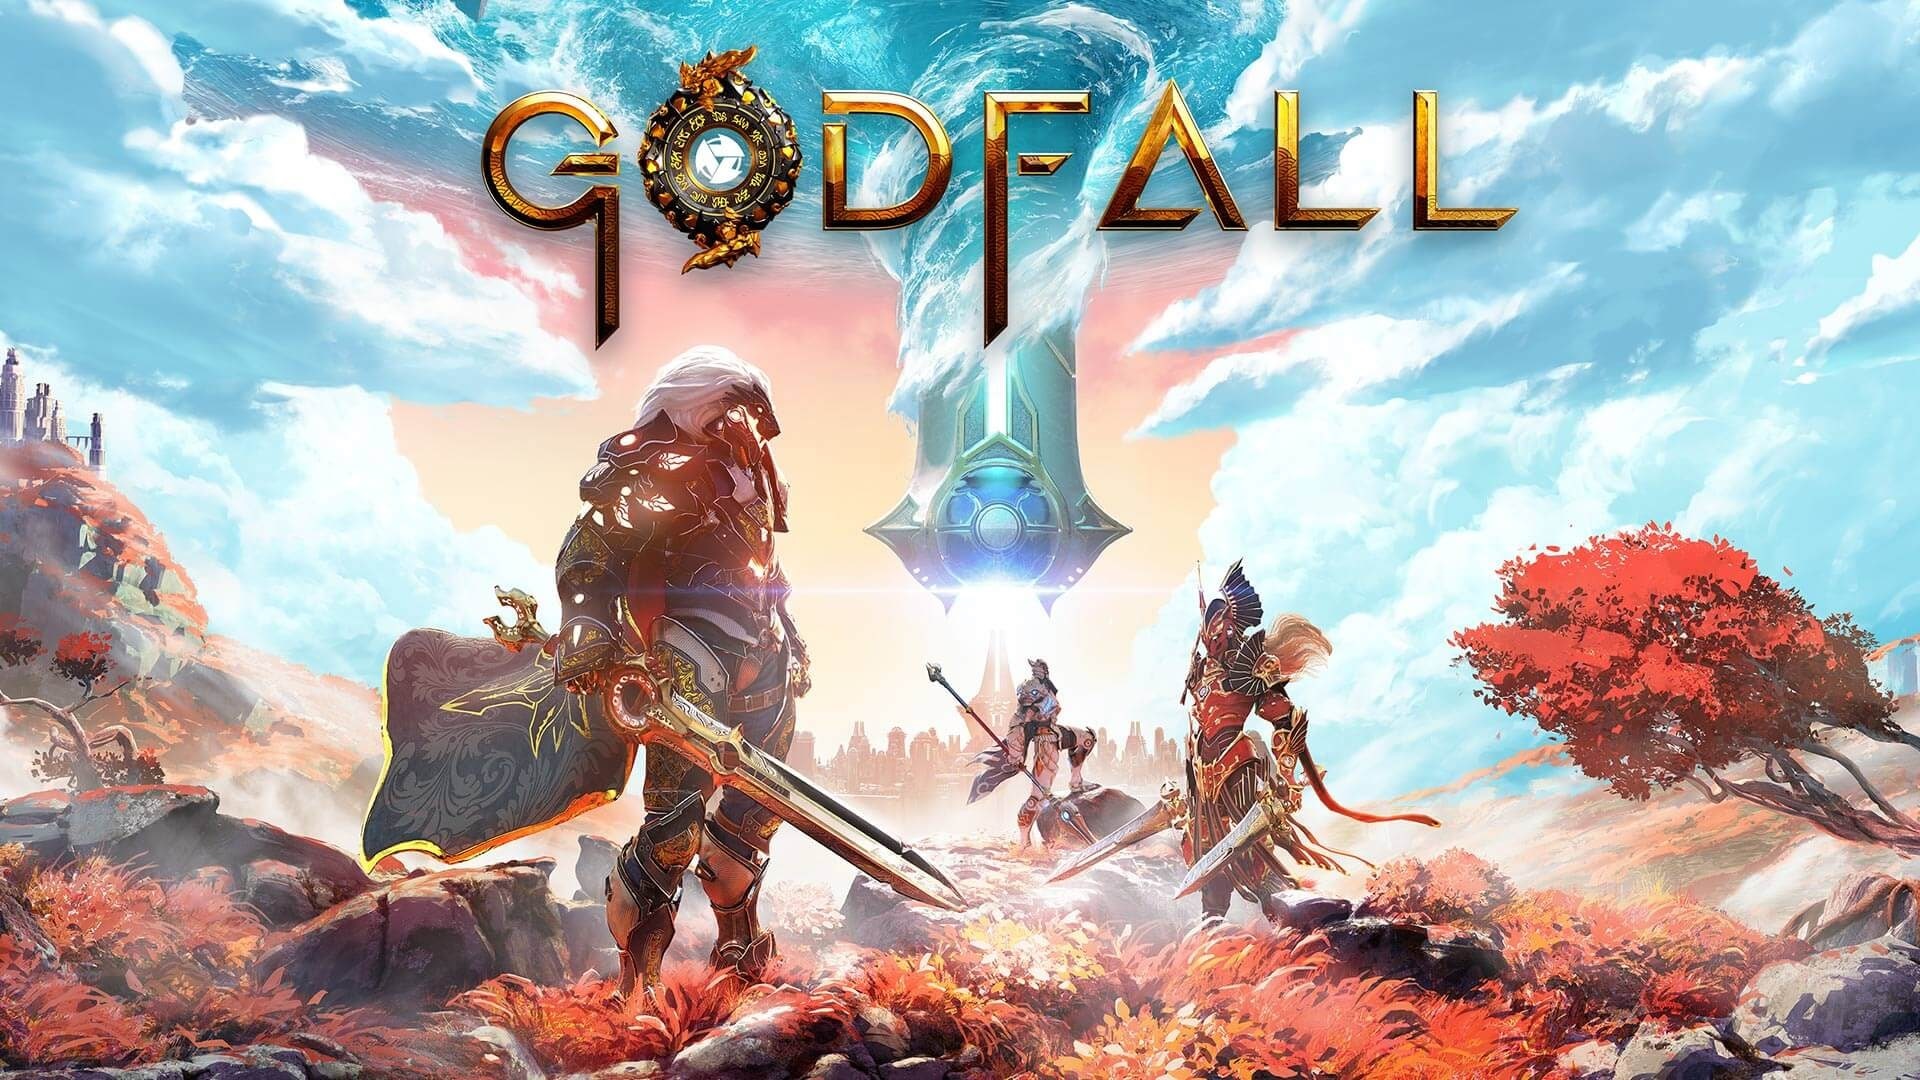 Godfall - Already a Best seller for PC, with Steam keys at $14.99